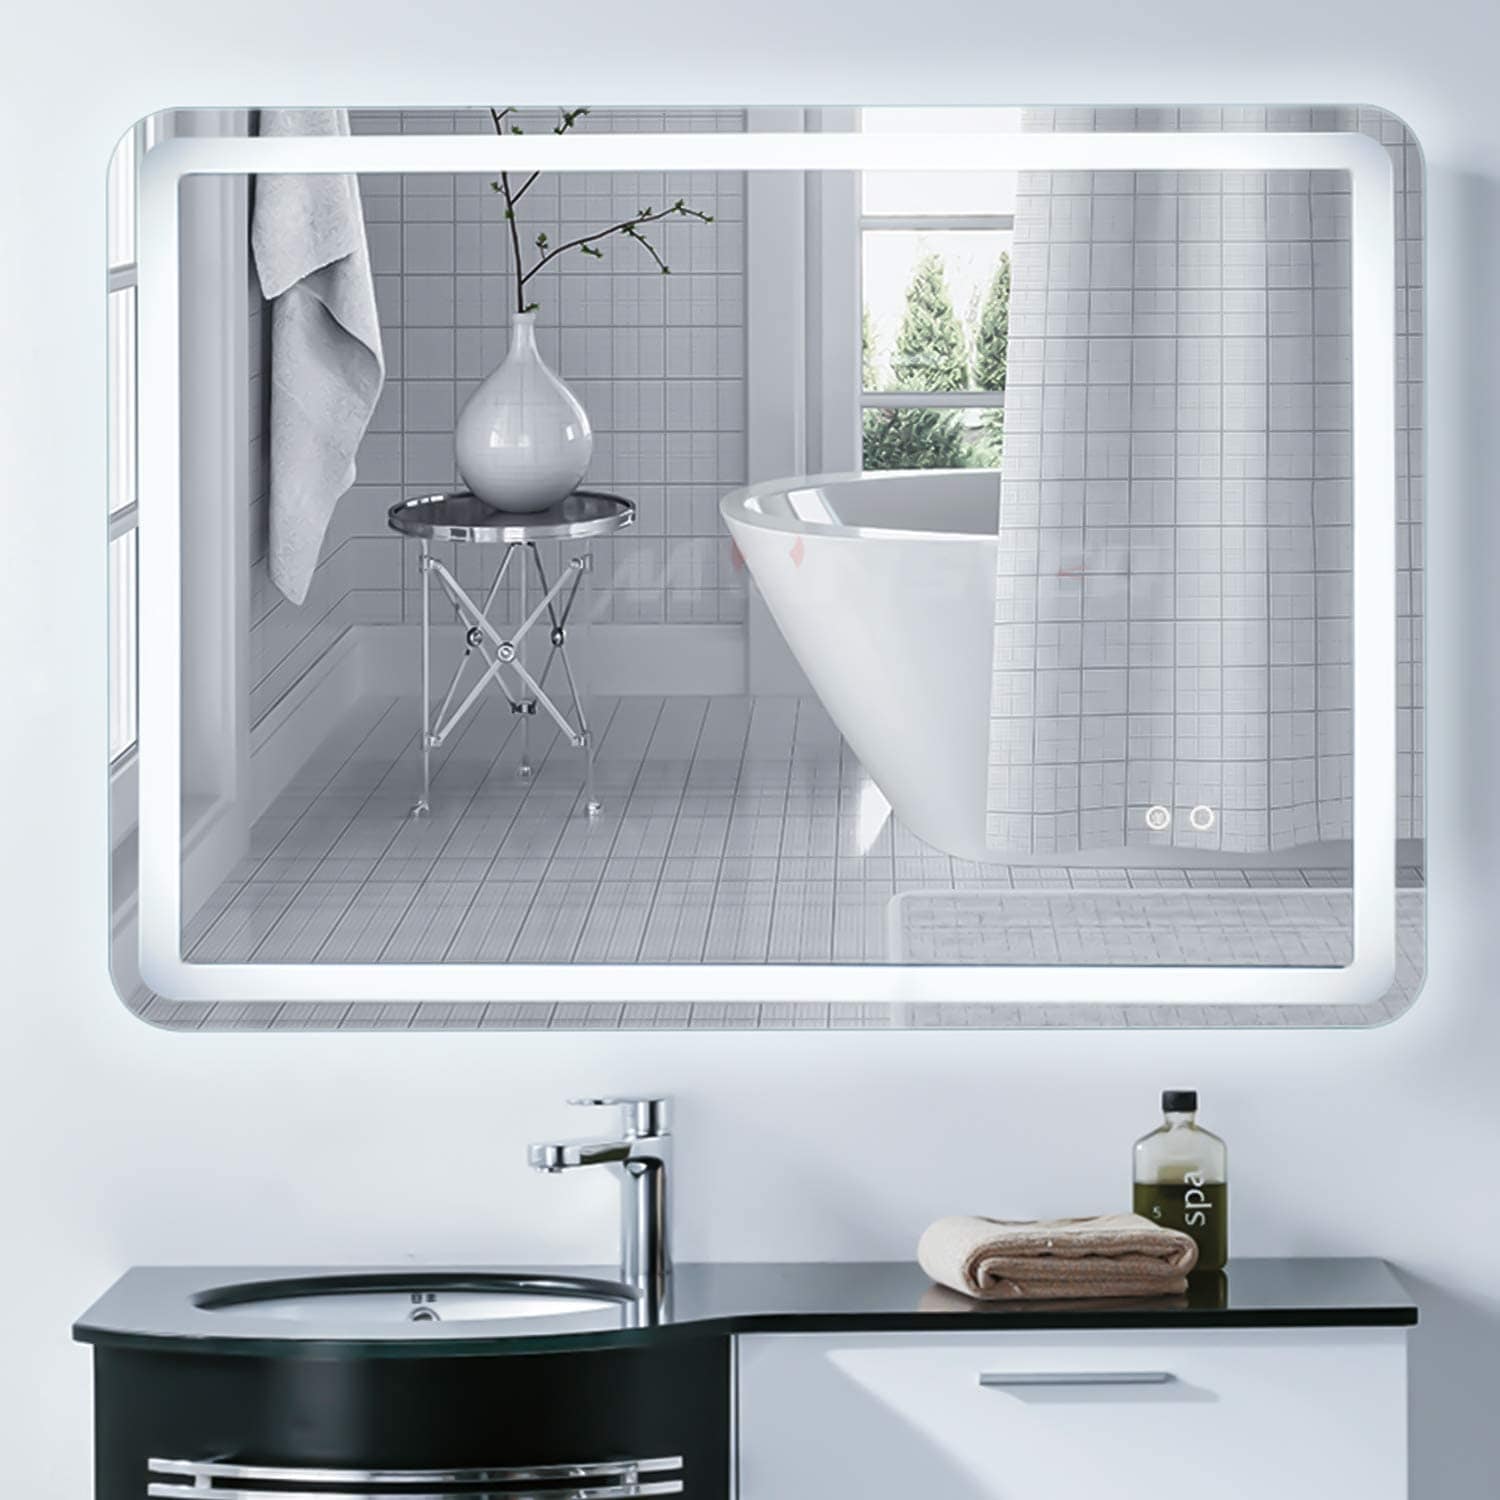 36*28 Inch LED Bathroom Mirror With Lights Anti-Fog Dimmable Makeup Mirror  Smart Touch Illuminated Frameless Wall Vanity Mirror Bed Bath  Beyond  36338909